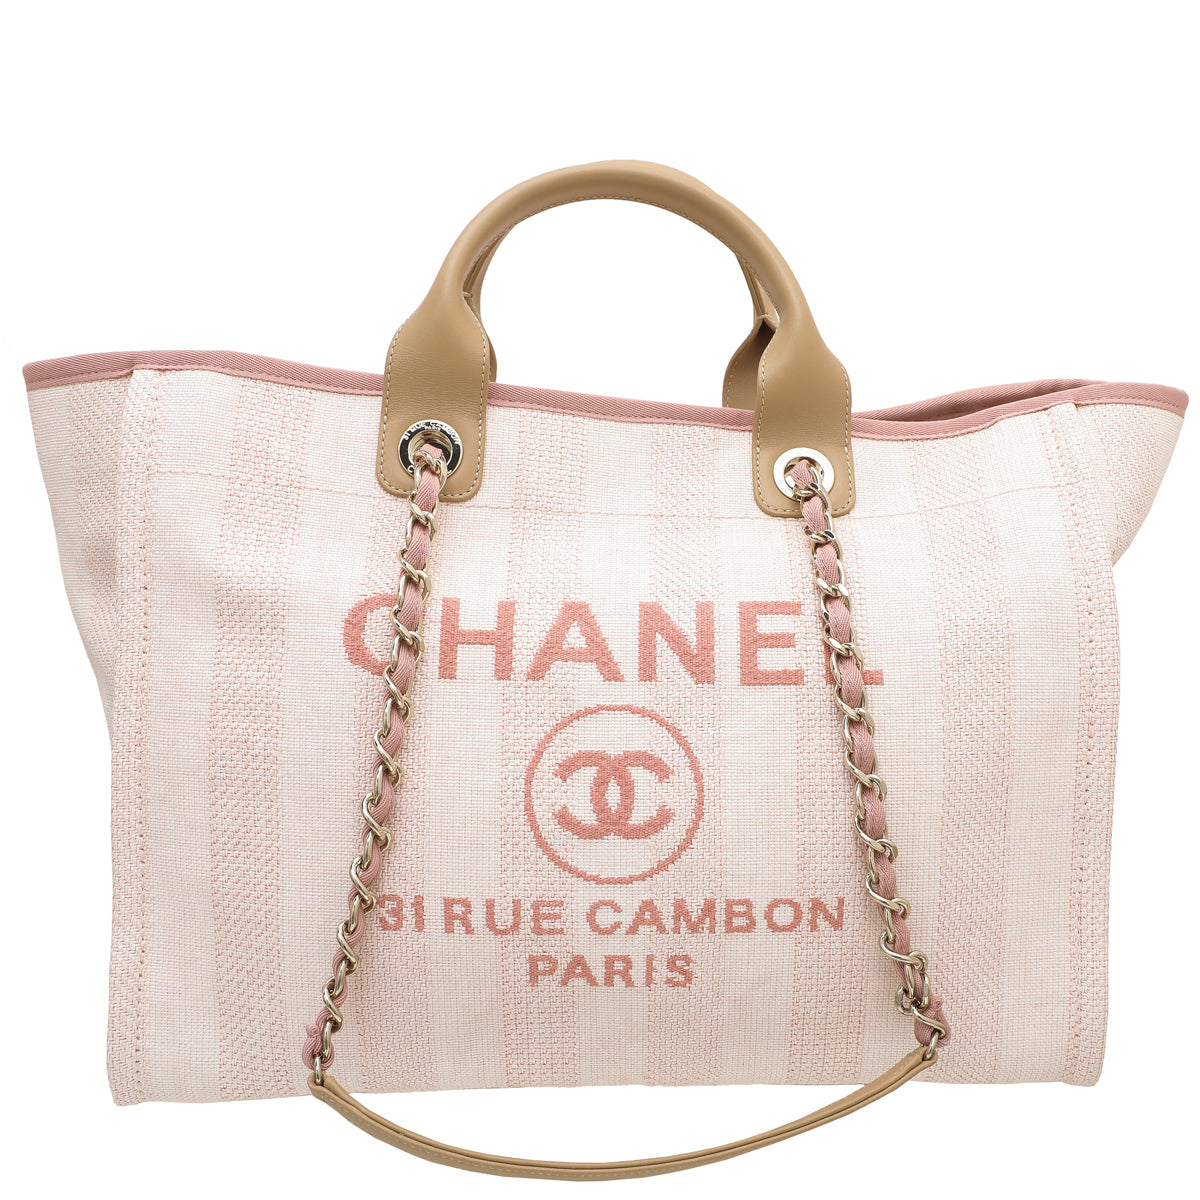 Chanel Pink Deauville Mixed Fiber Shopping Tote Bag